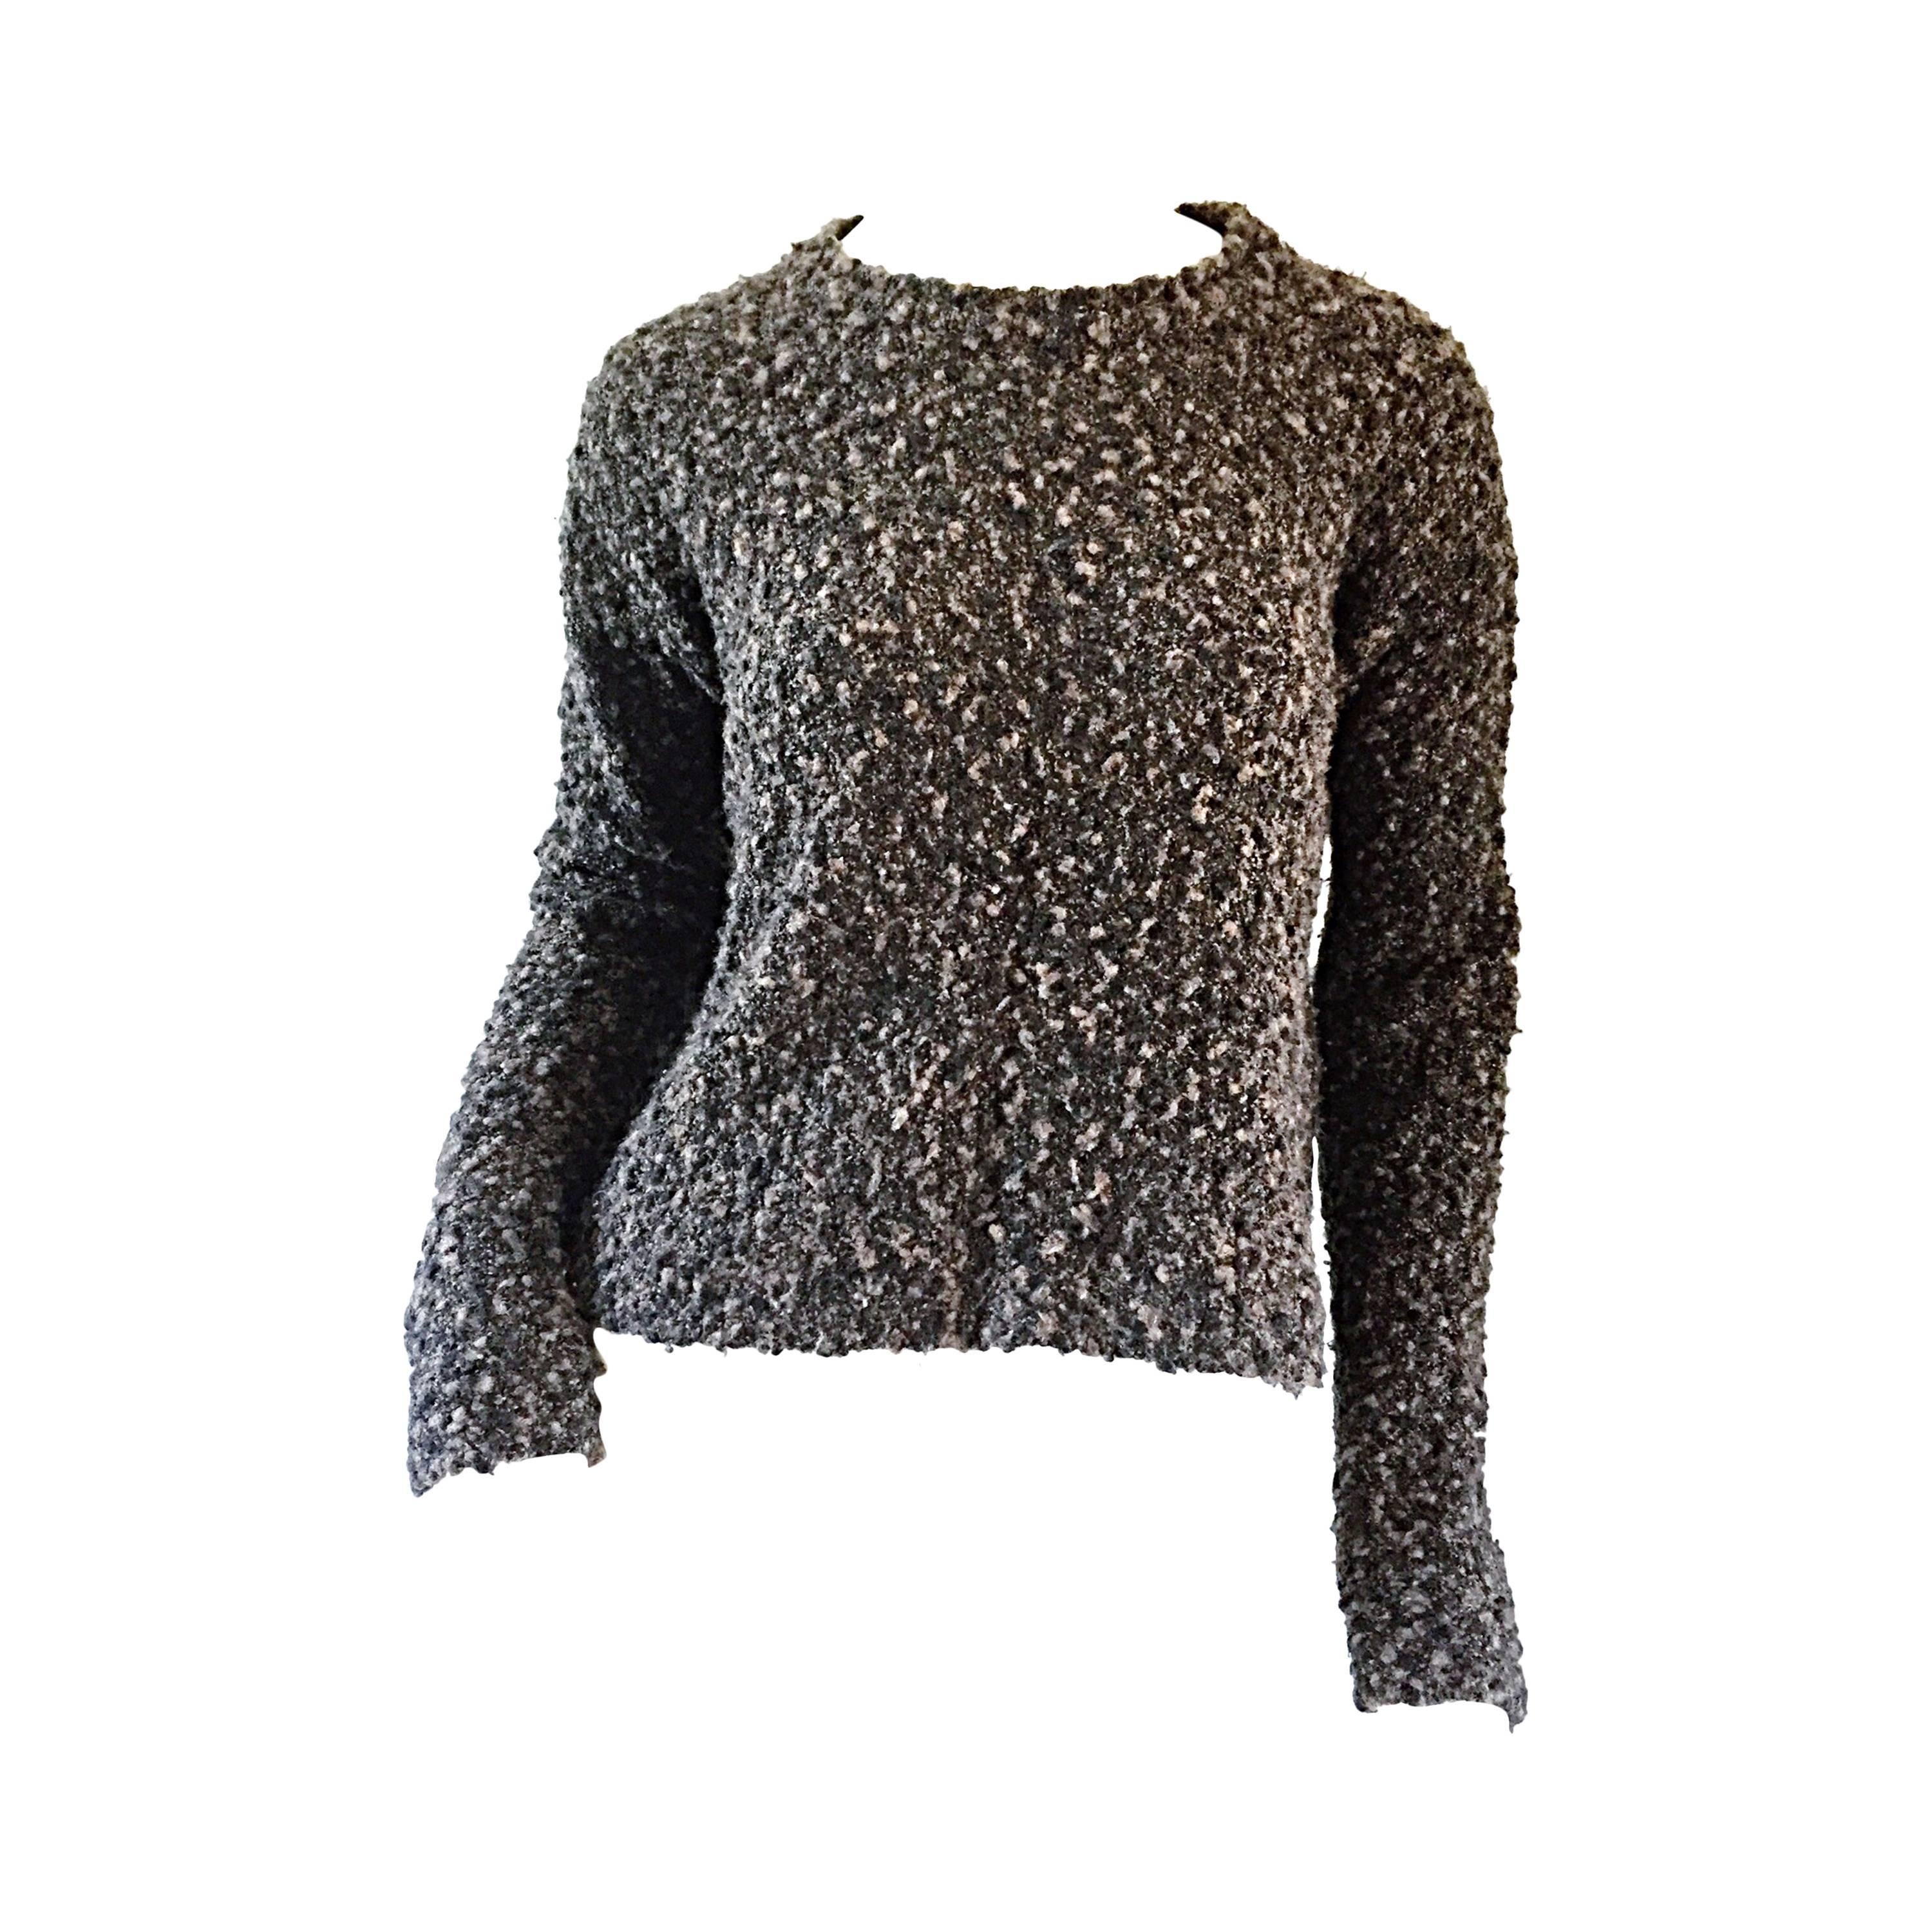 Chic Vintage Alessandra ' Made in Italy ' Gray Comfy Slouchy Crop Top Sweater